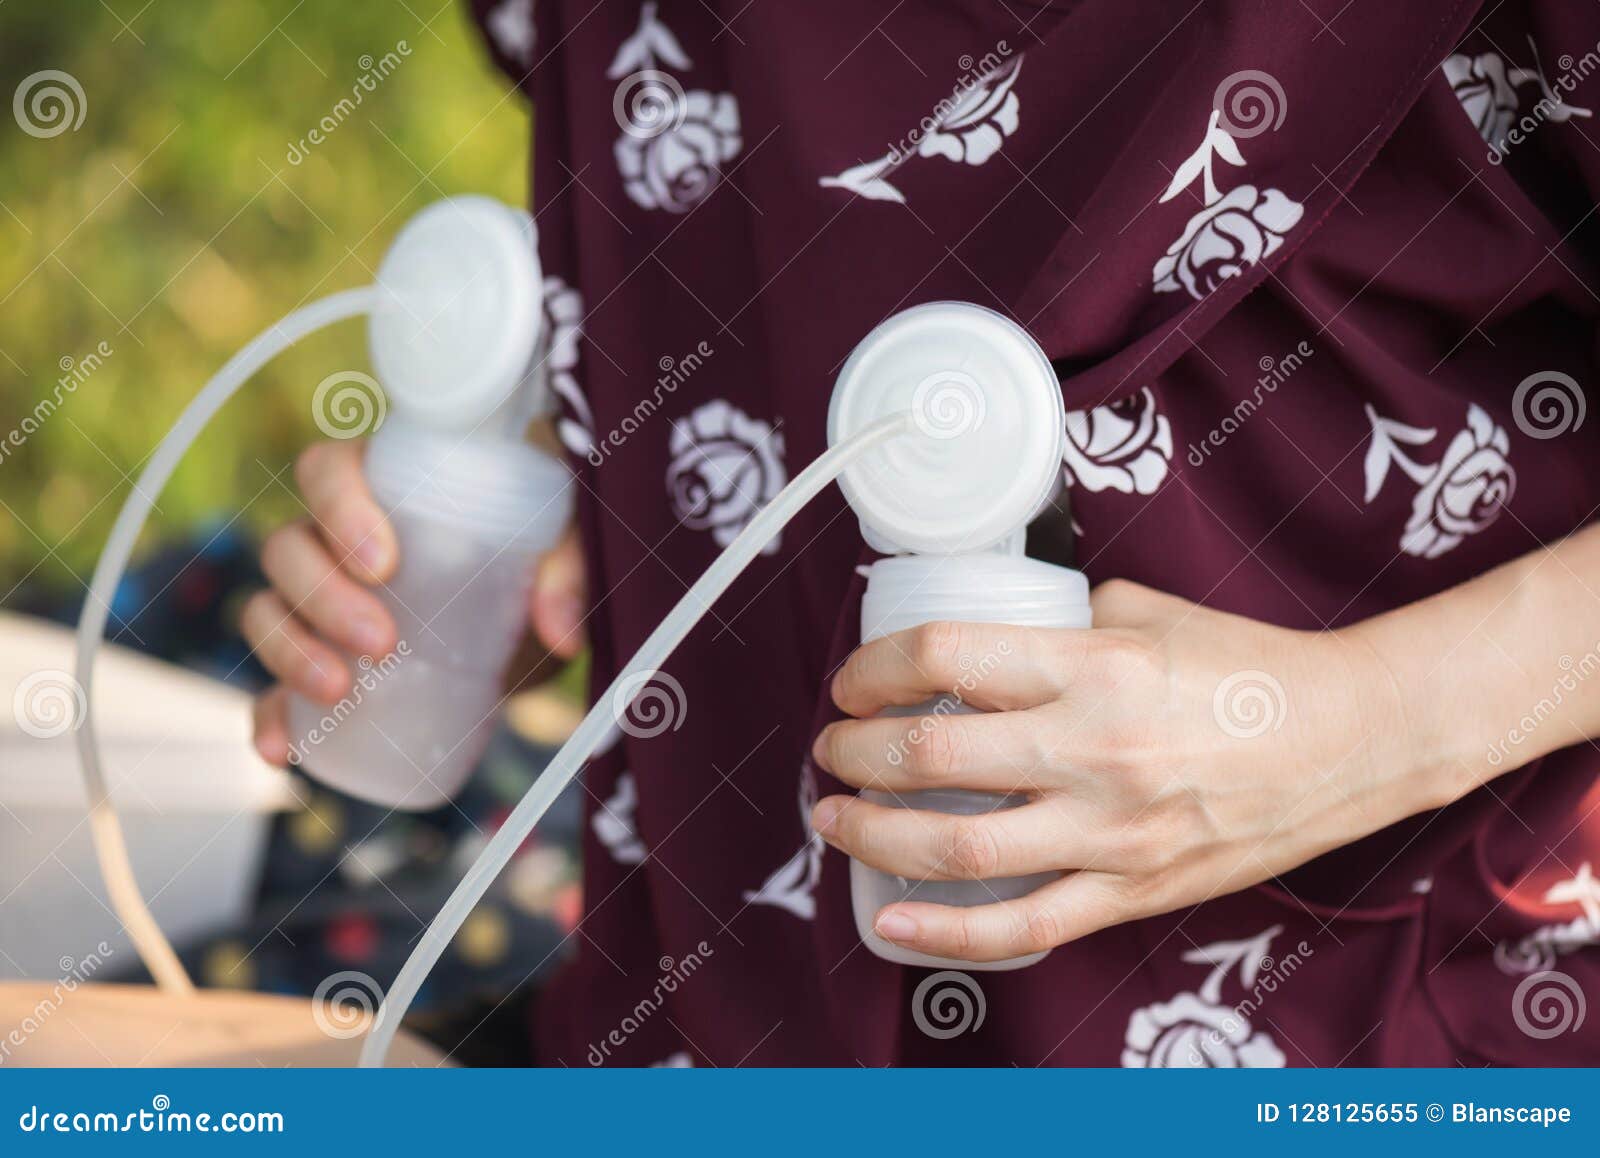 Pump Breast Milk With Bokeh Foliage Background Stock Image I